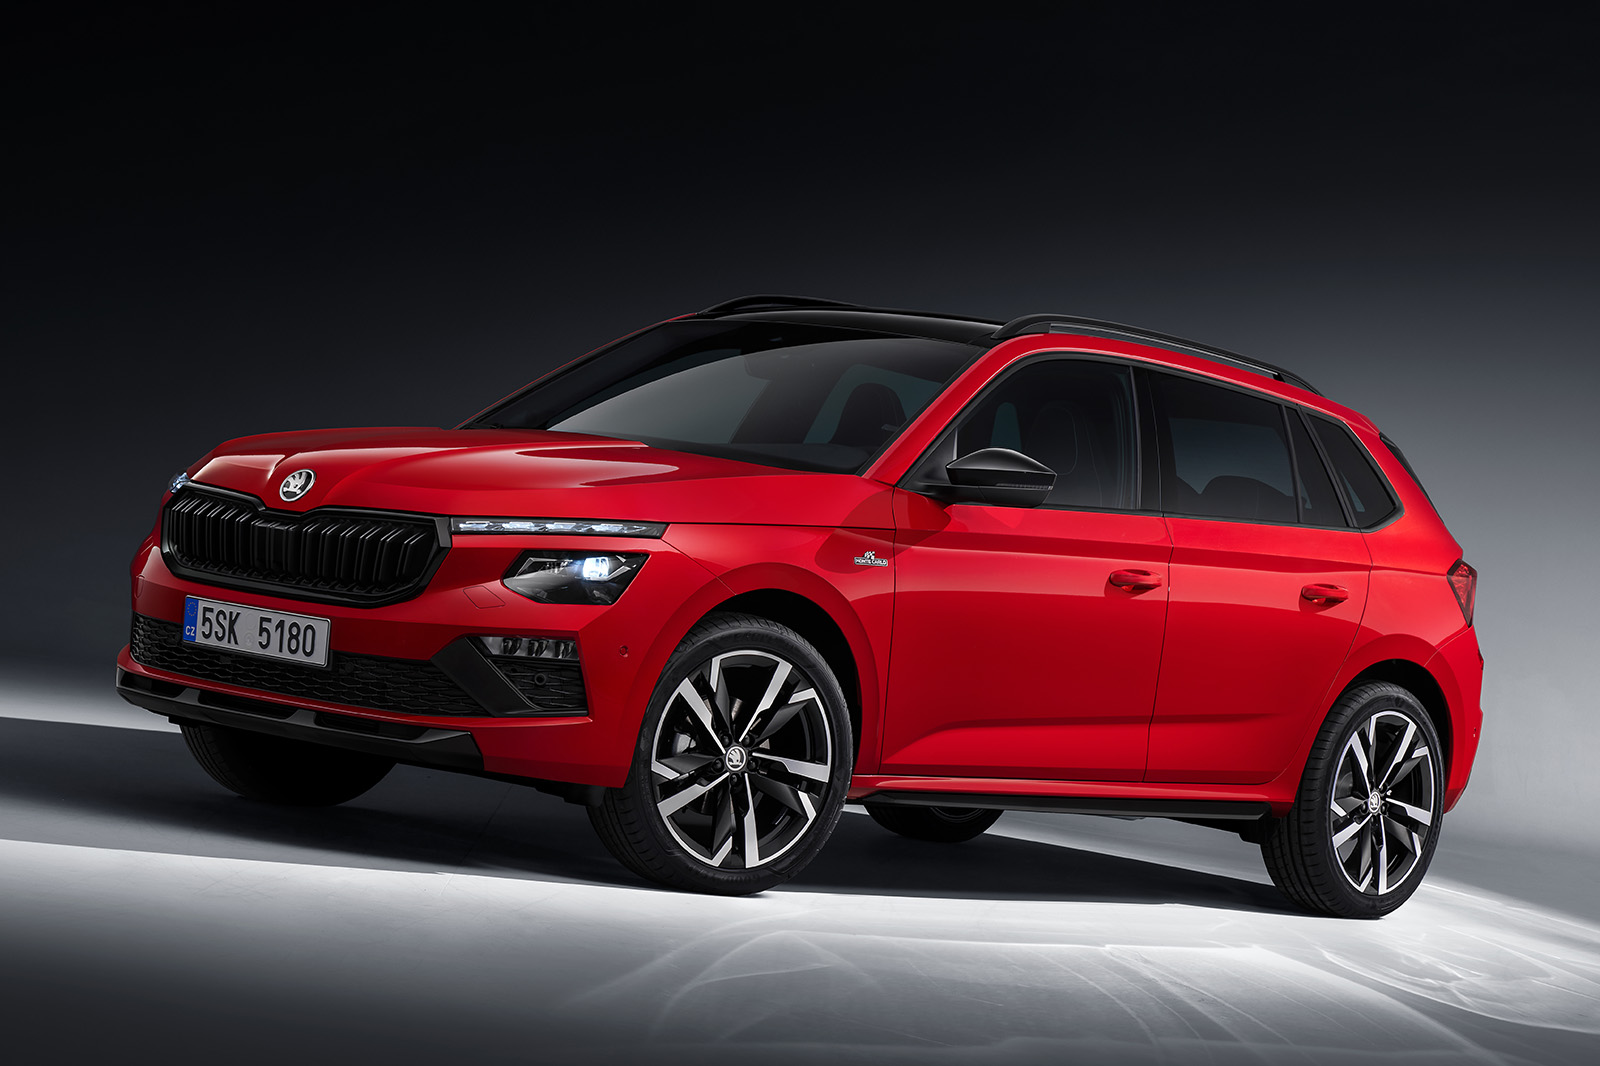 Skoda Kamiq gains more rugged look, priced from £24,030